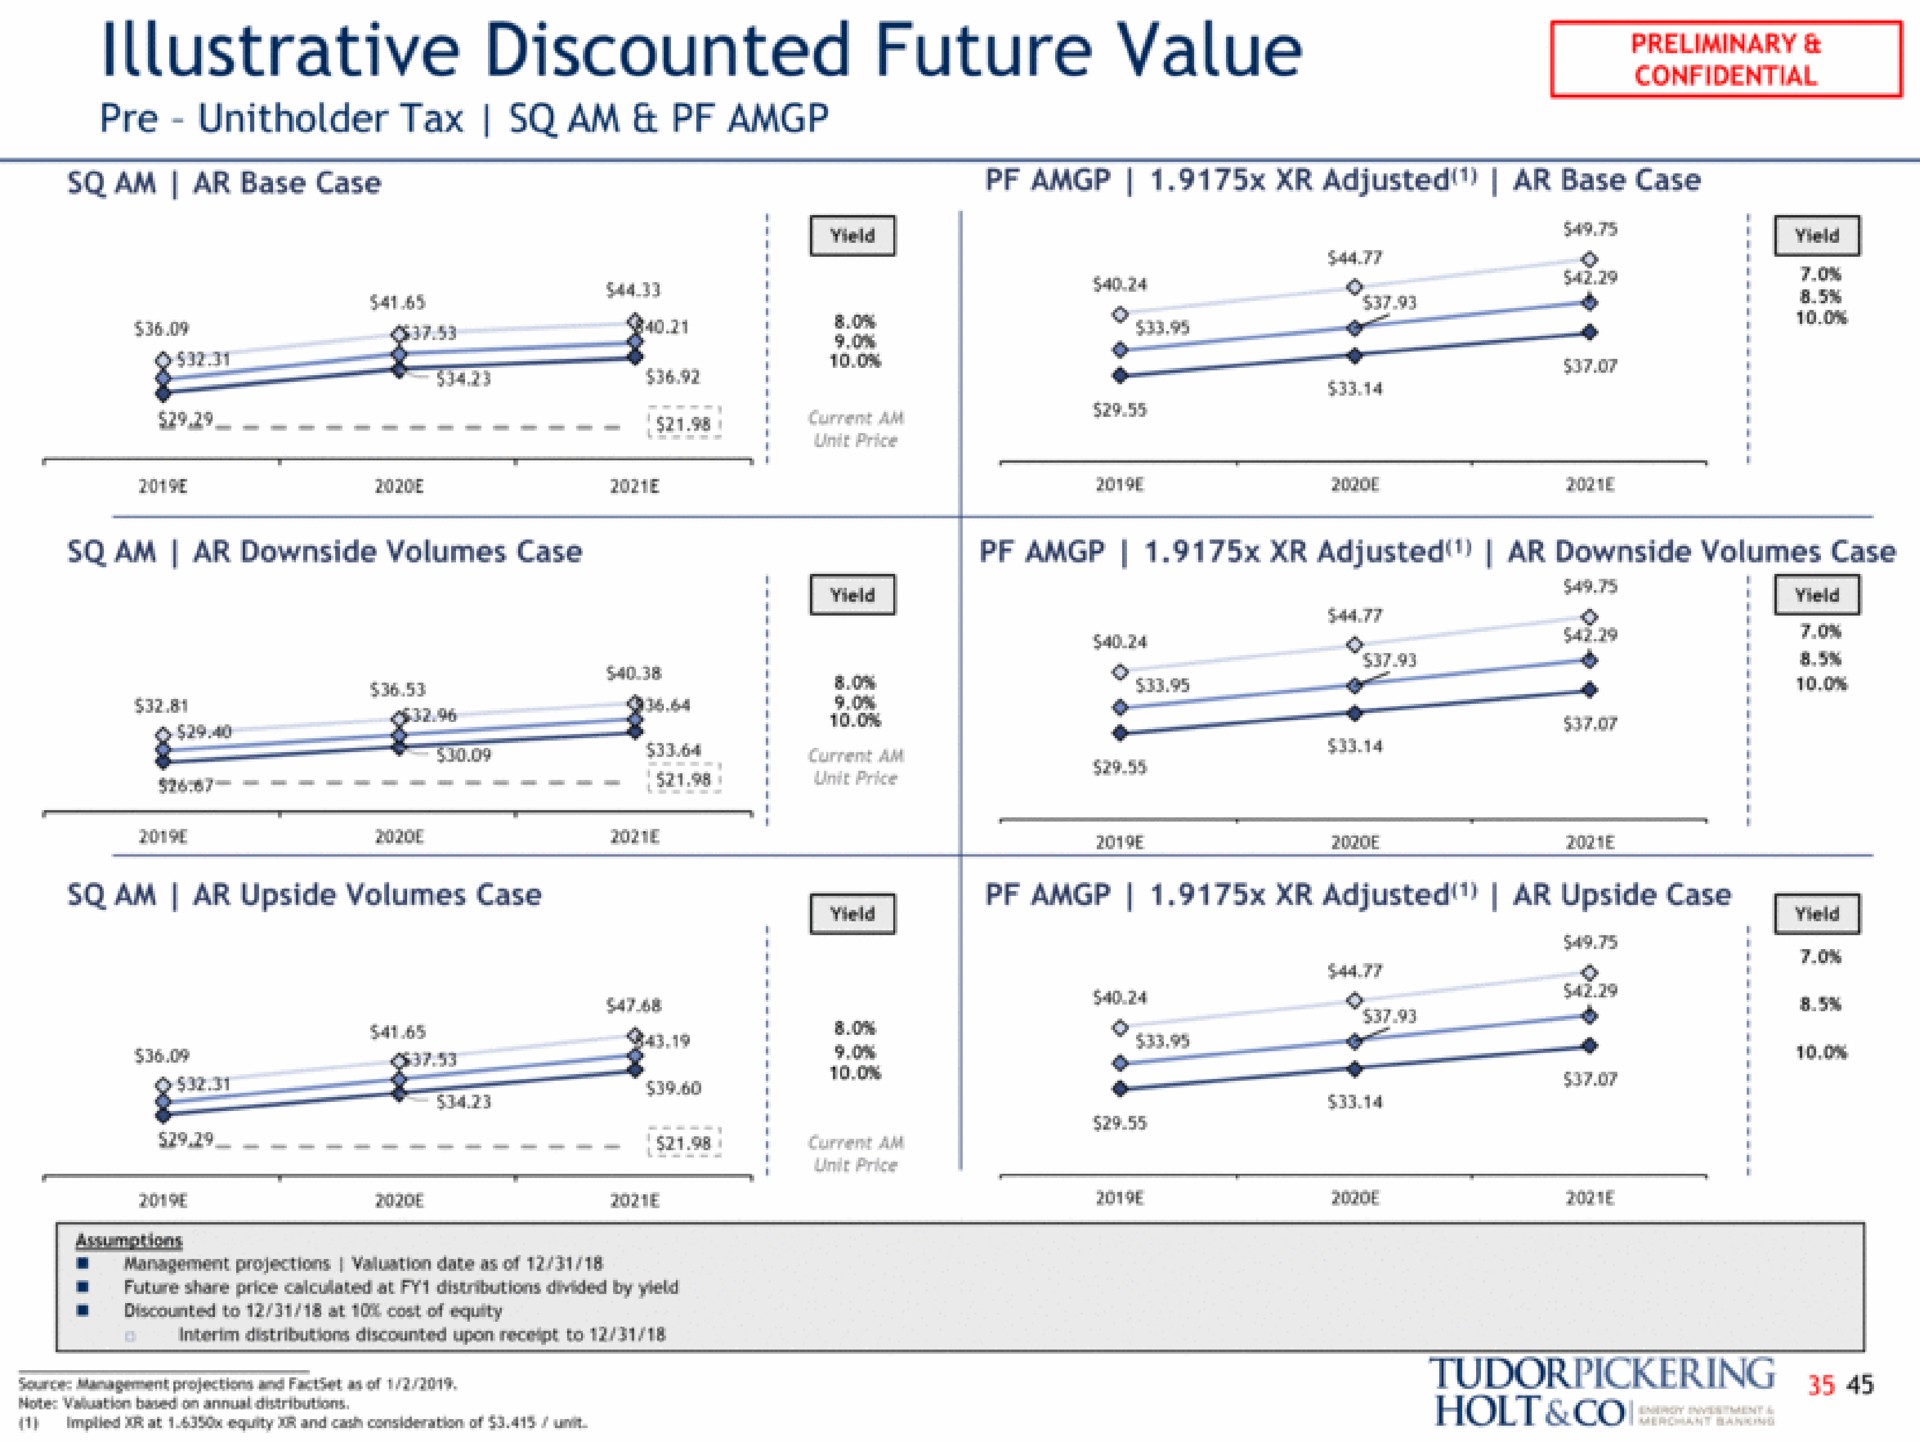 illustrative discounted future value a at and consideration of unit holt | Tudor, Pickering, Holt & Co